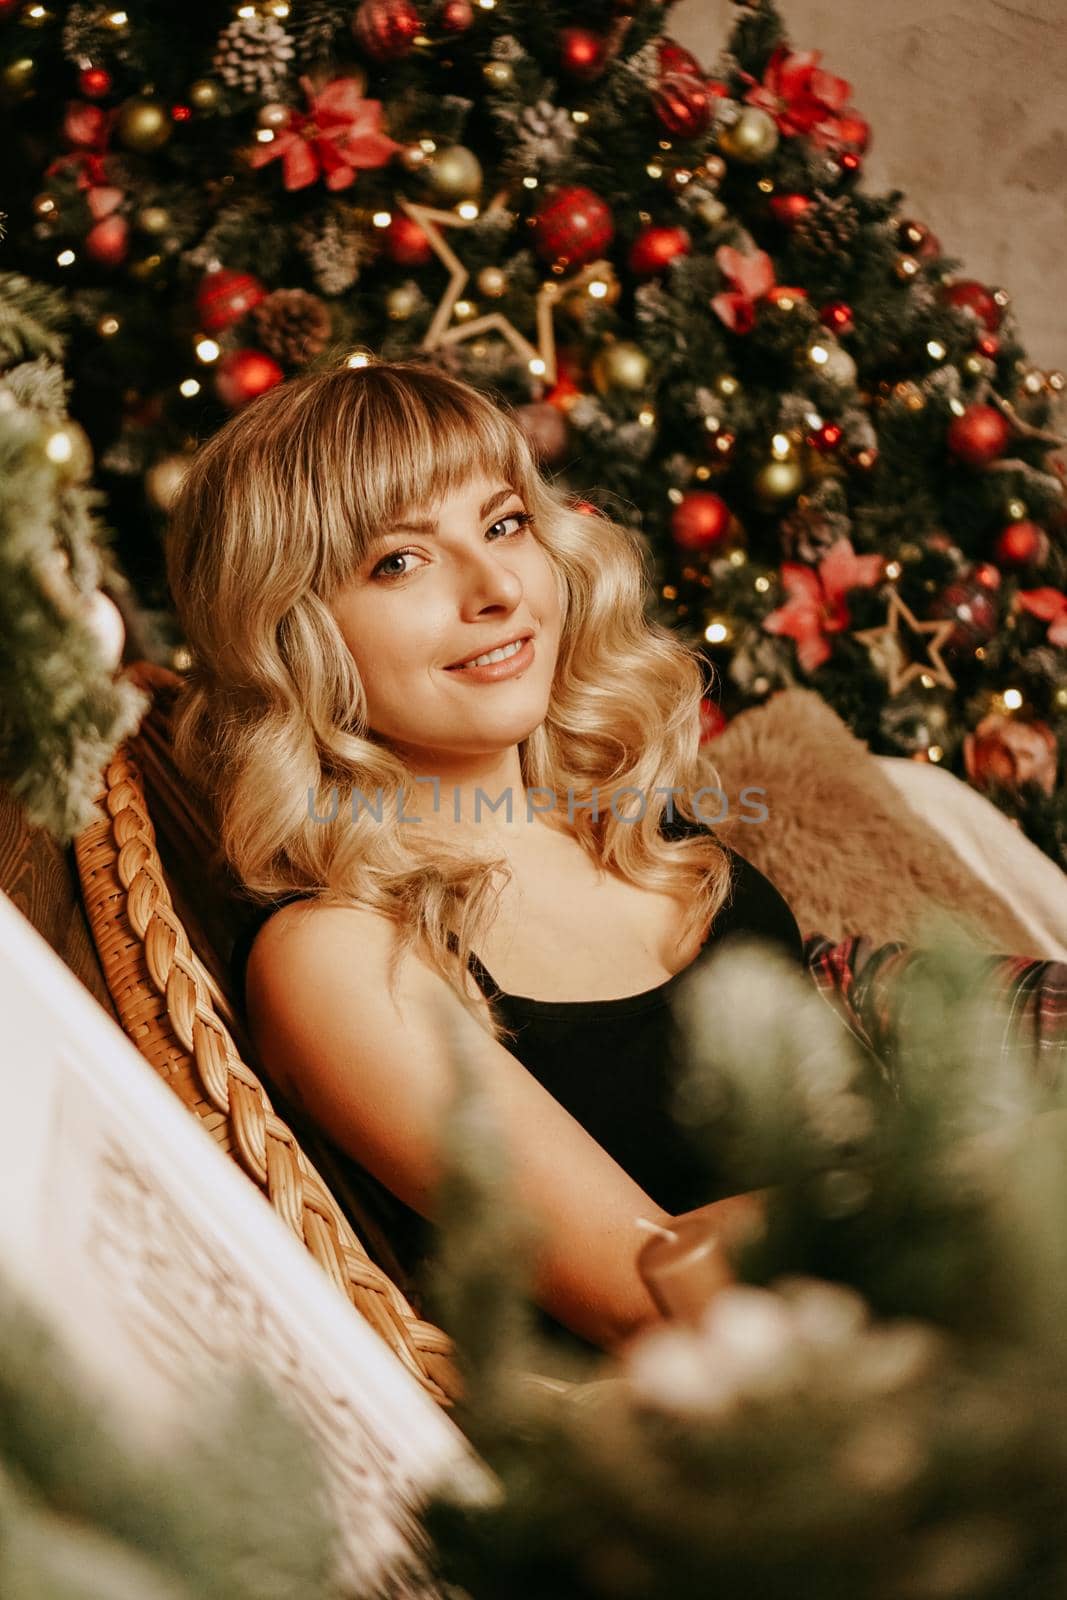 Close up portrait of beautiful young girl with long curly hair on a christmas background with lights. Magic warm new year photo. Cozy interior.